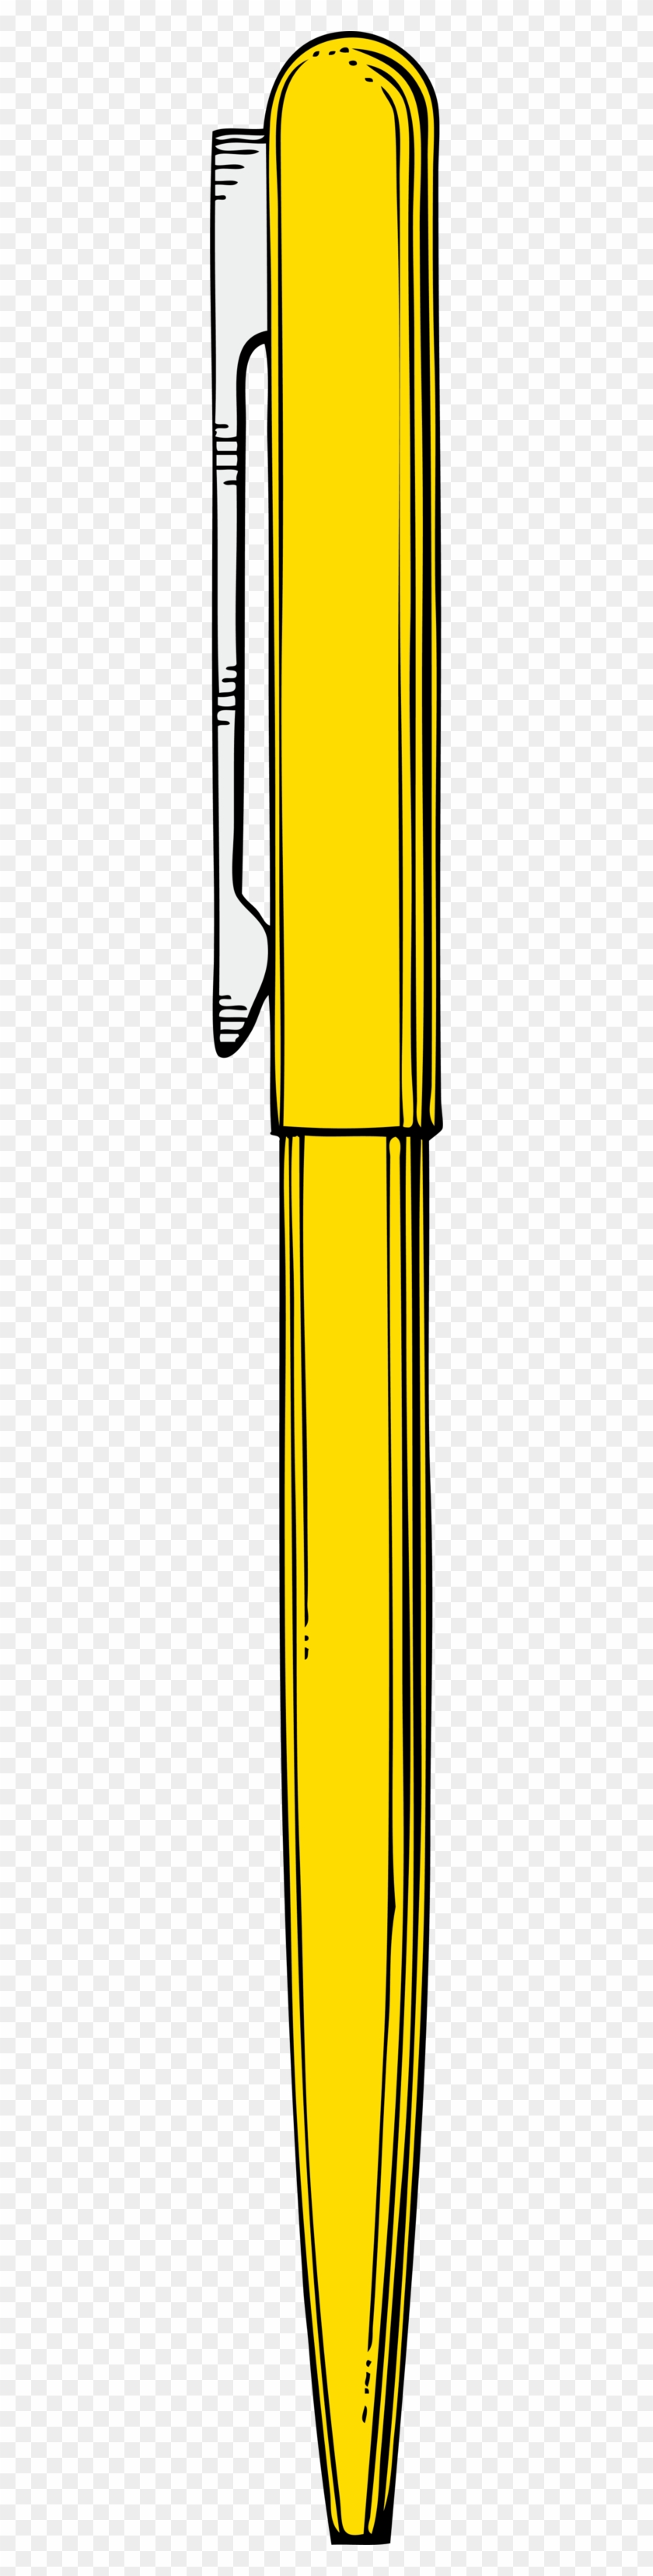 Pen Clipart Yellow - Colorfulness #256567